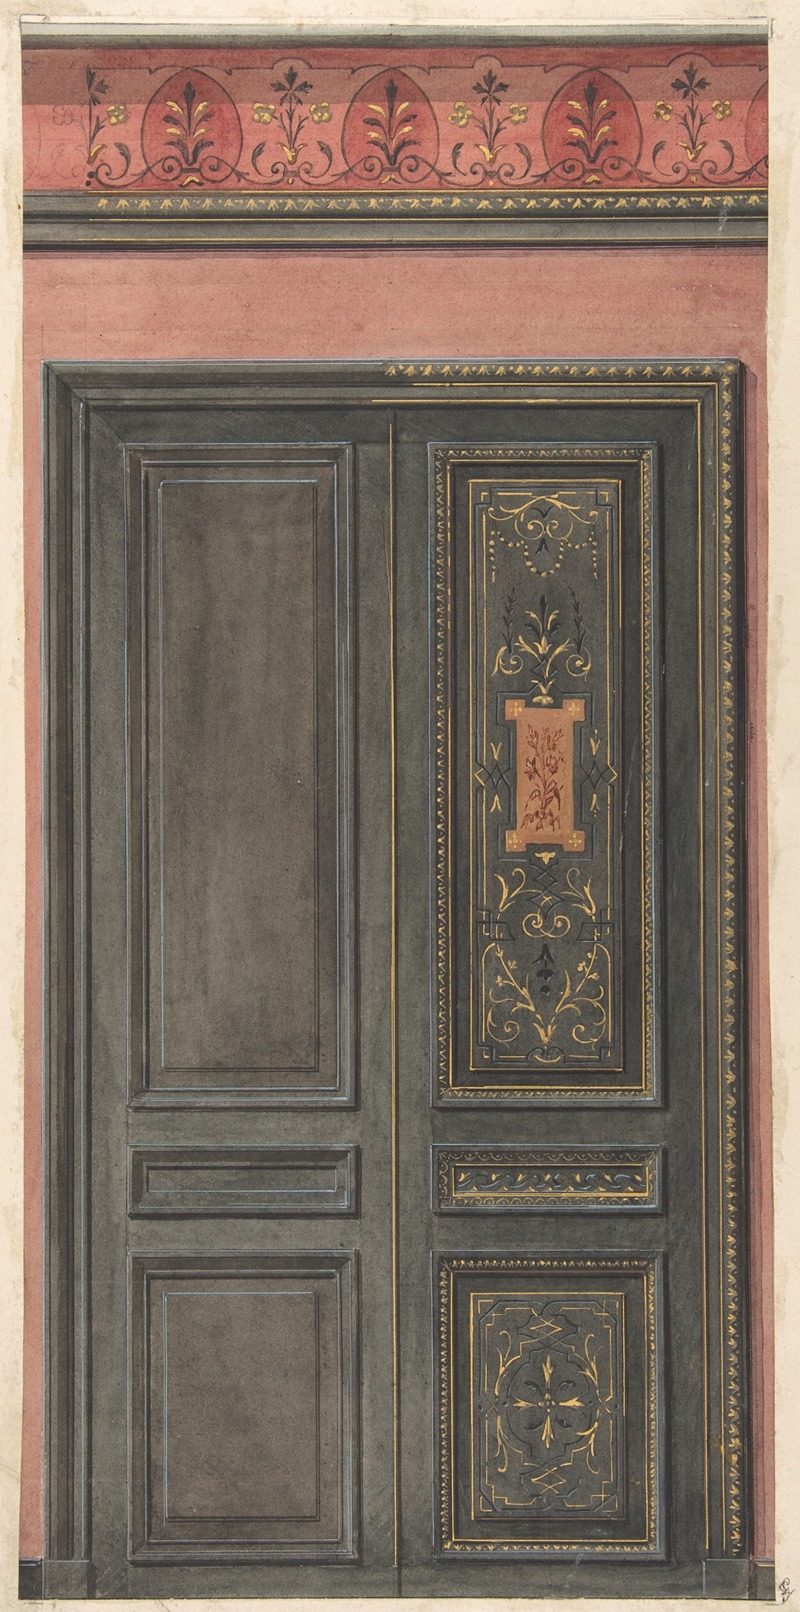 Jules-Edmond-Charles Lachaise - Design for a door